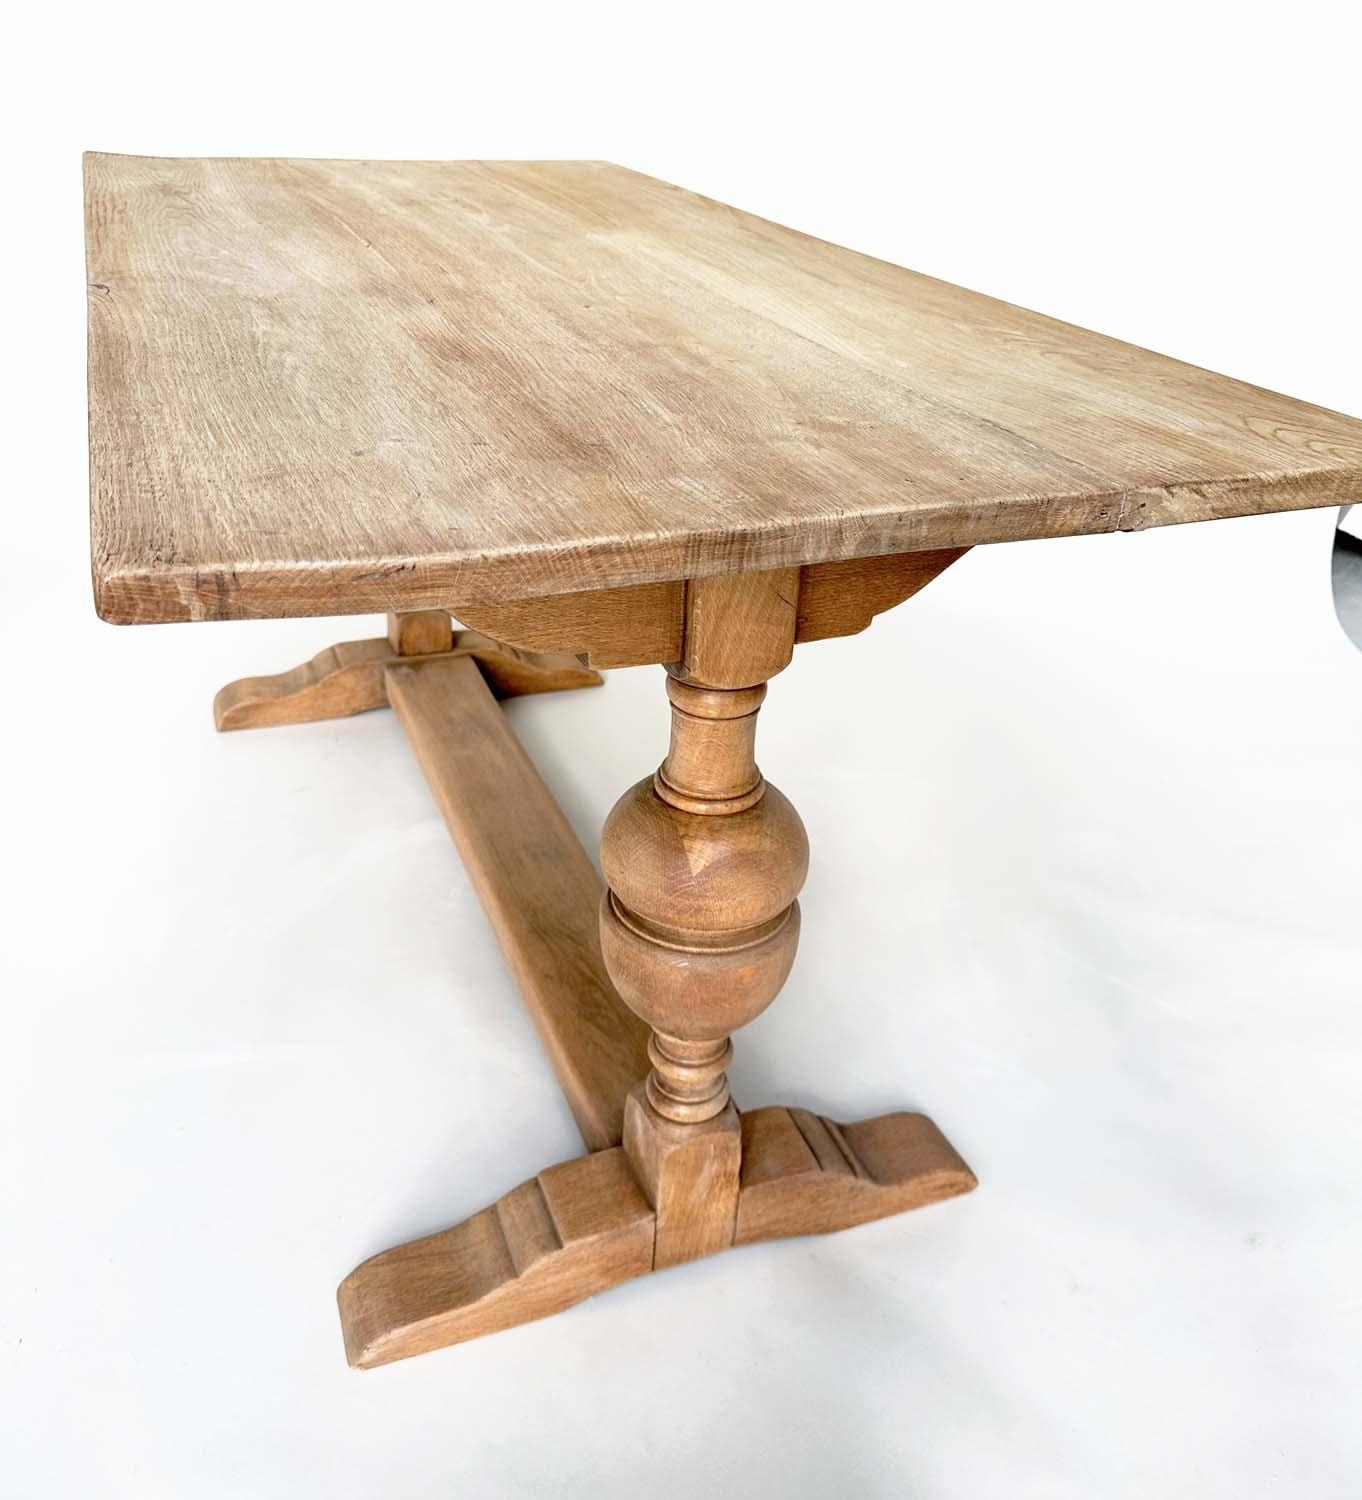 REFECTORY TABLE, early English style oak with planked top, cup and cover turned pillar trestles - Image 7 of 12